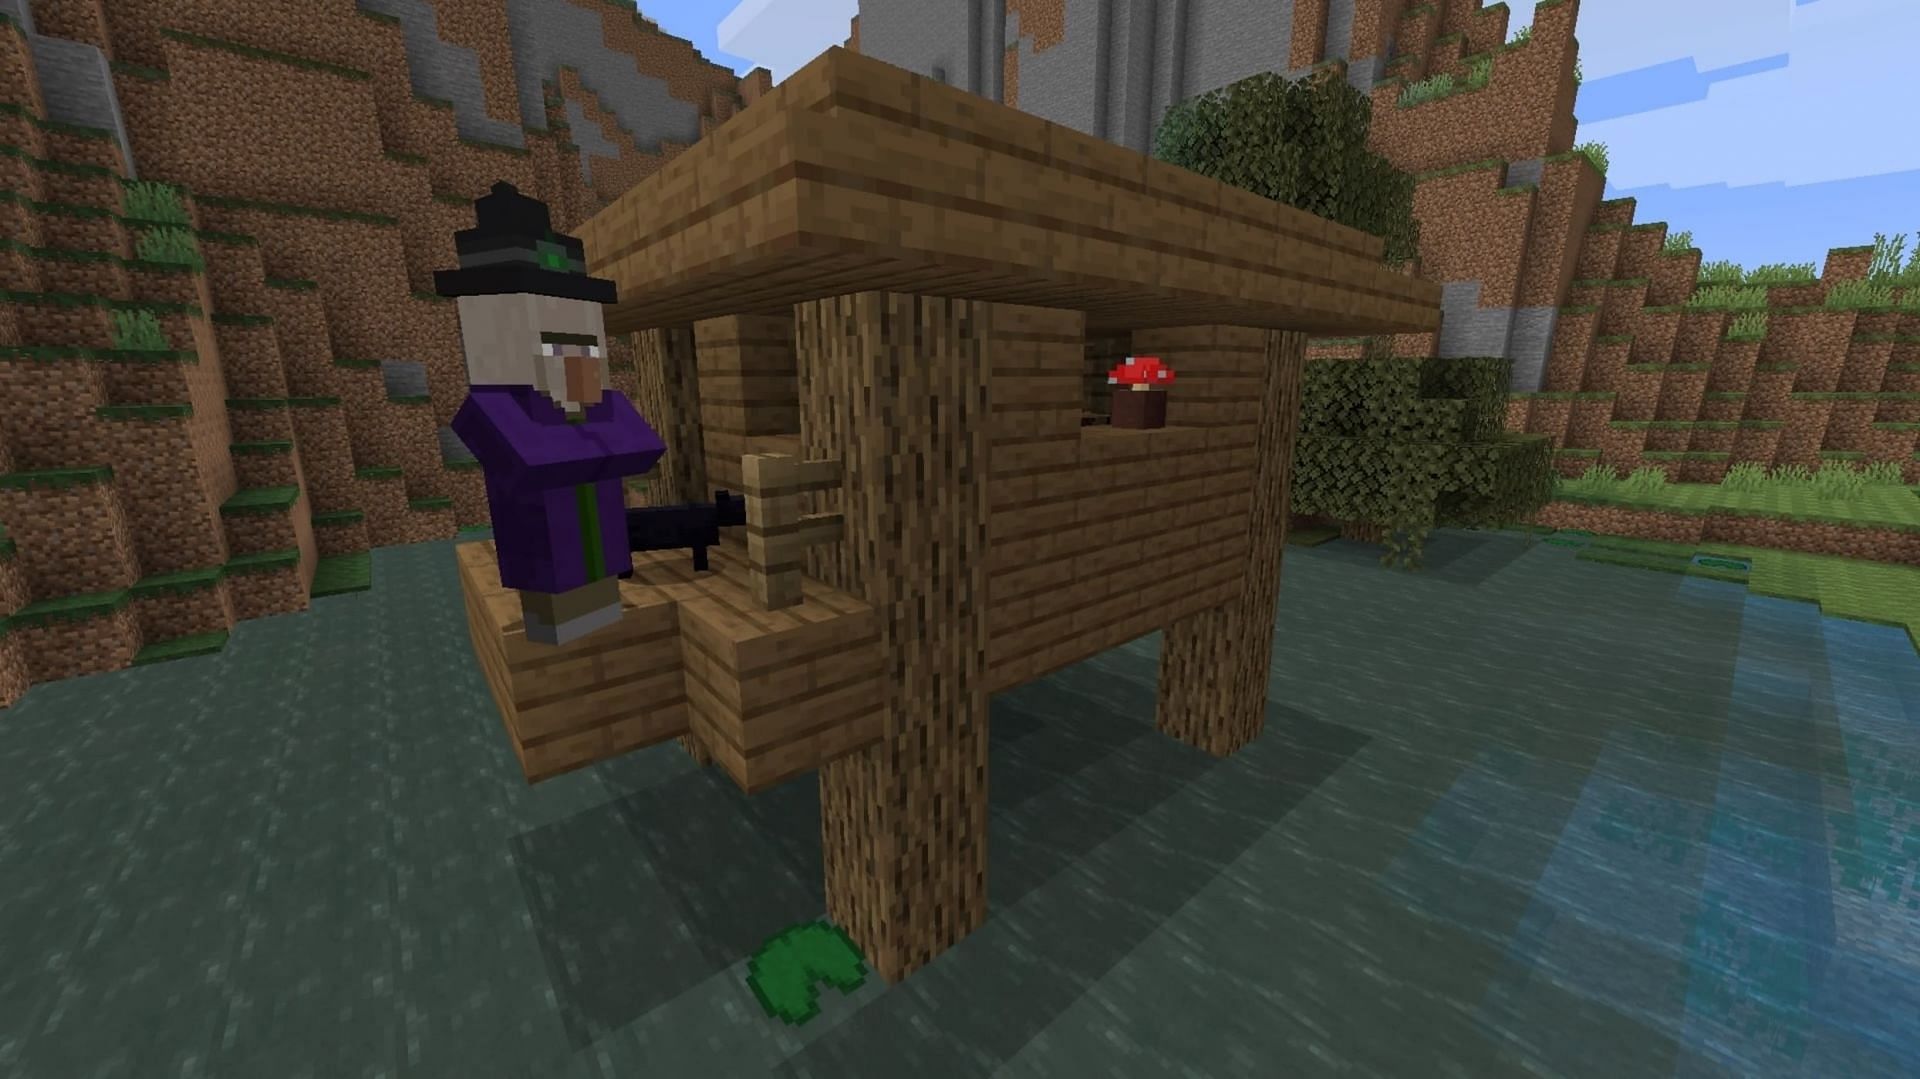 Players will have various structures to loot after spawning into this seed (Image via Minecraft Seed HQ)